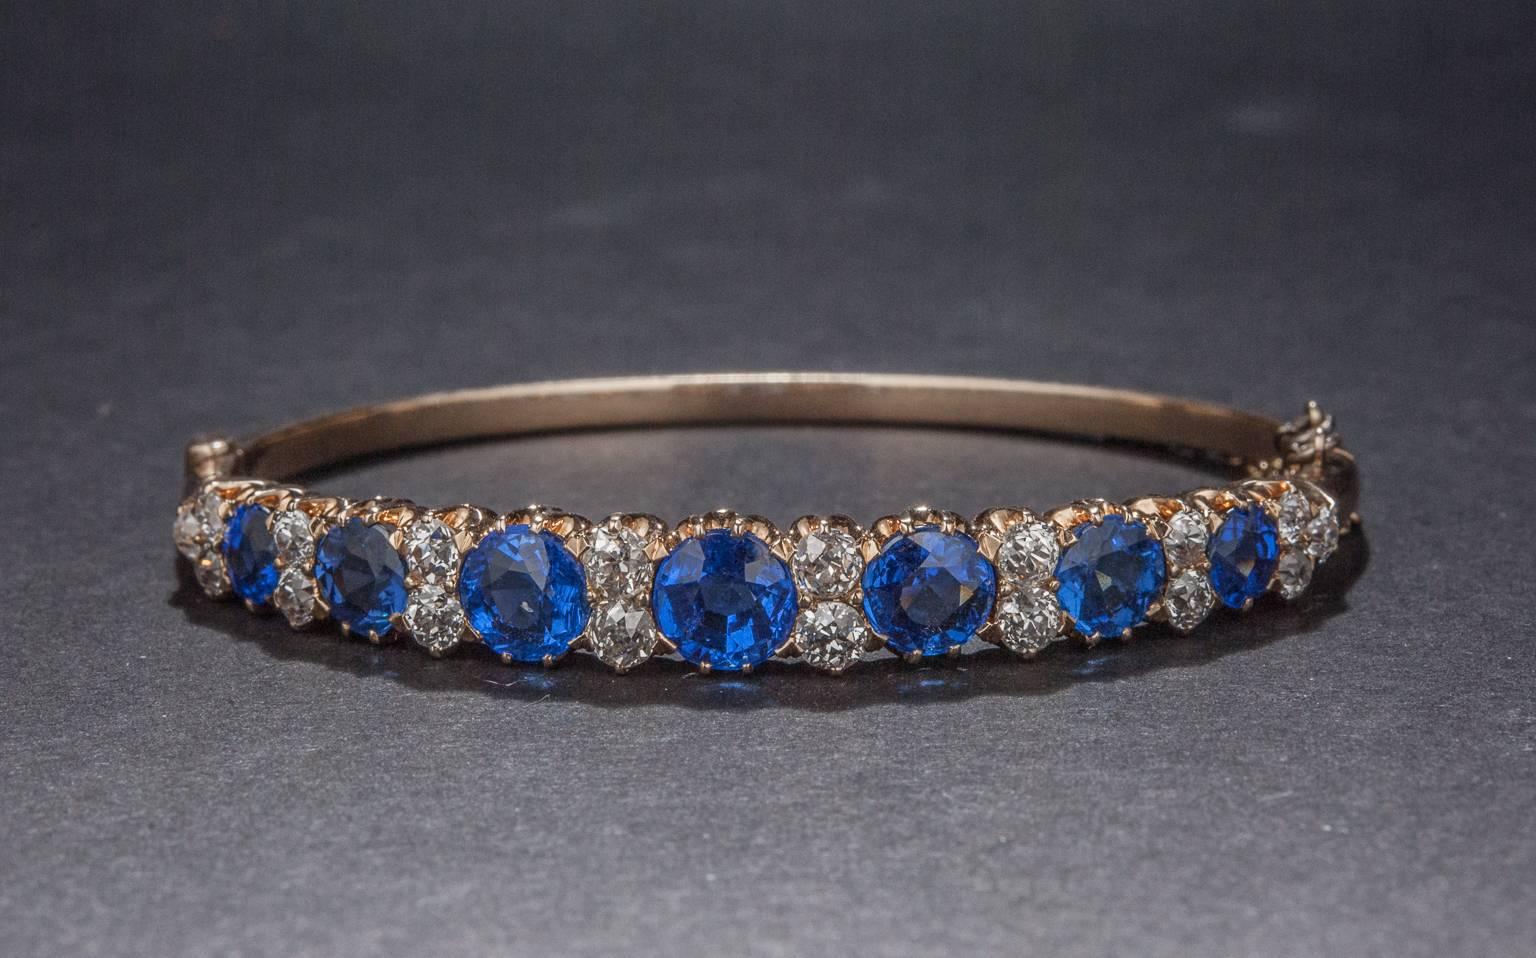 1900s Diamond and Synthetic Blue-Stone Bracelet In Excellent Condition For Sale In Carmel, CA